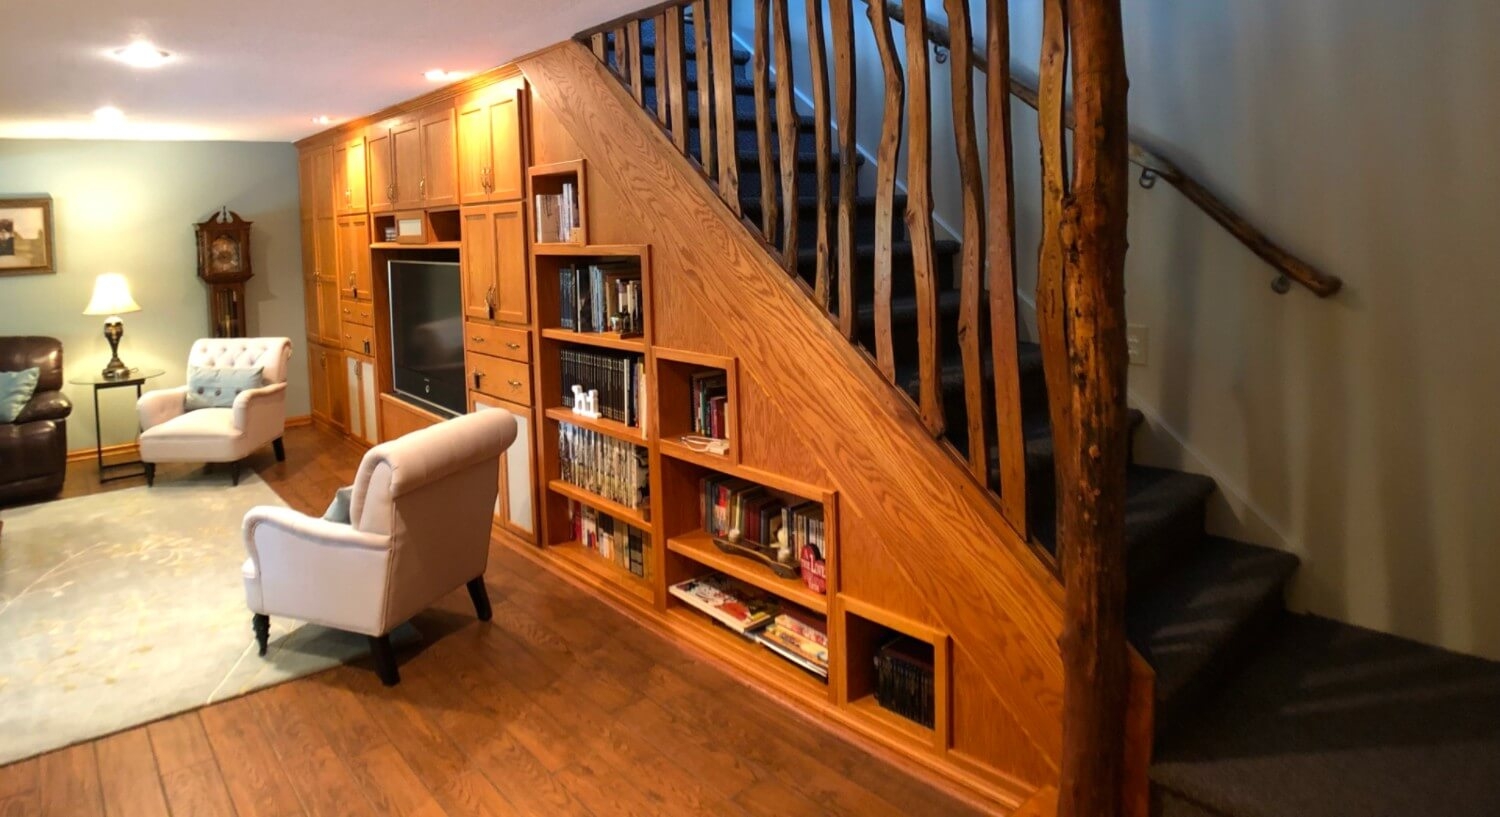 Staircase with shelving, two white chairs and tv